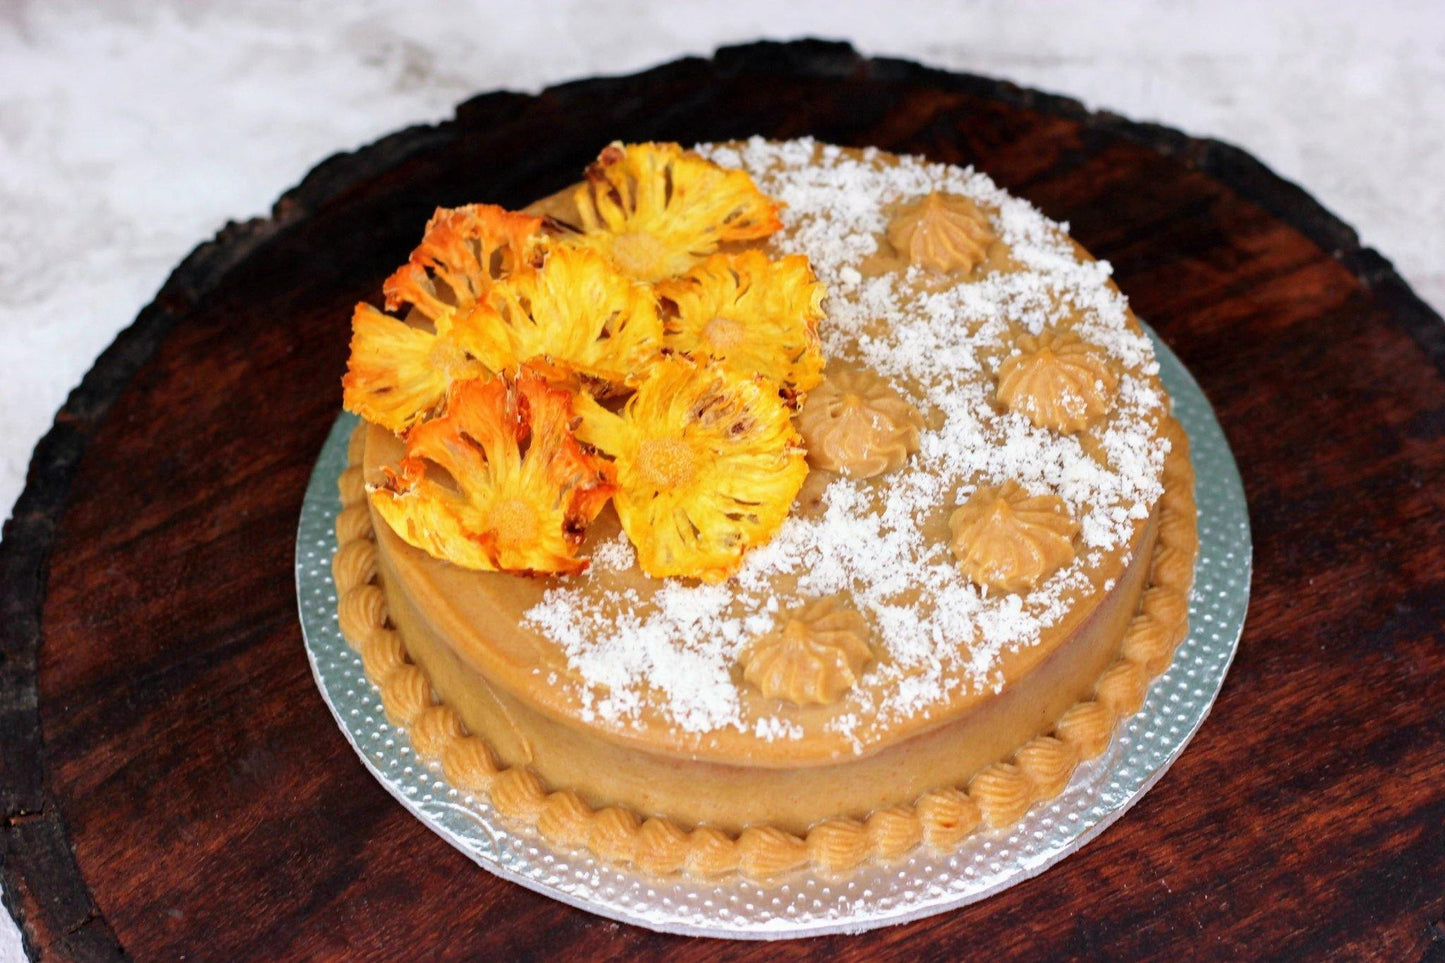 New! Punchy Pineapple, Cashew and Coconut Floral Cake - 600g - Sampoorna Ahara - Healthy Food, Food Delivery, Food Order Online, Healthy Snacks, Healthy Breakfast, Sourdough Breads, Sugar-free Desserts